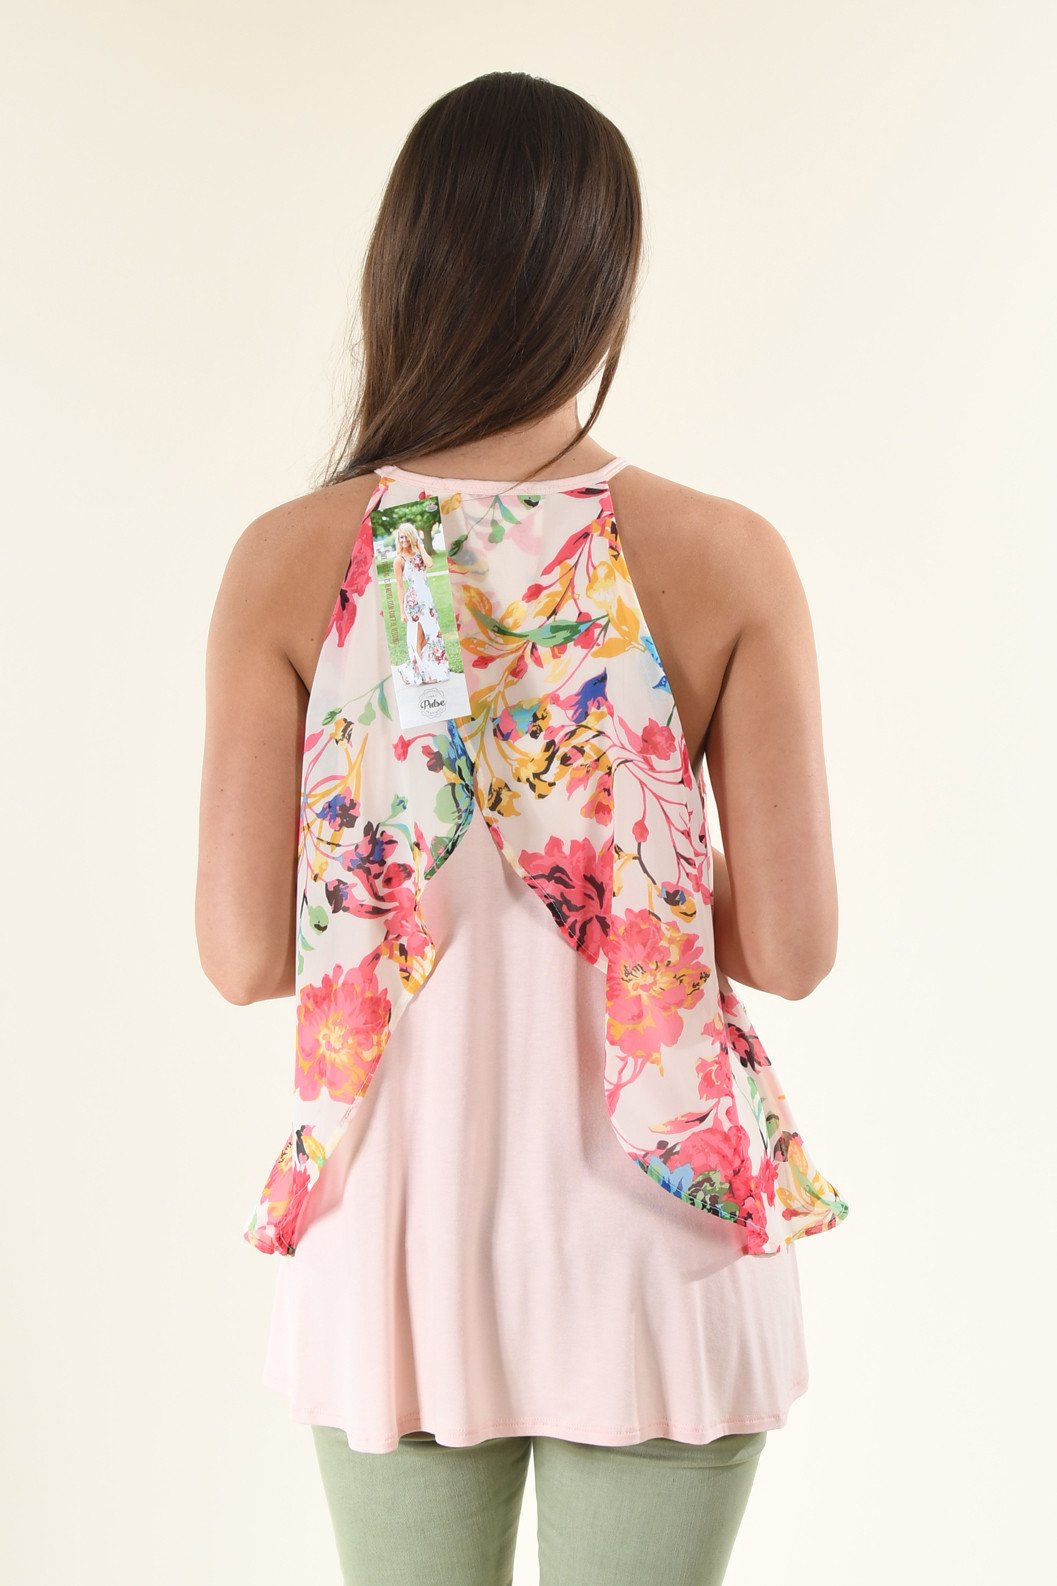 Flaunt Your Floral Tank Top